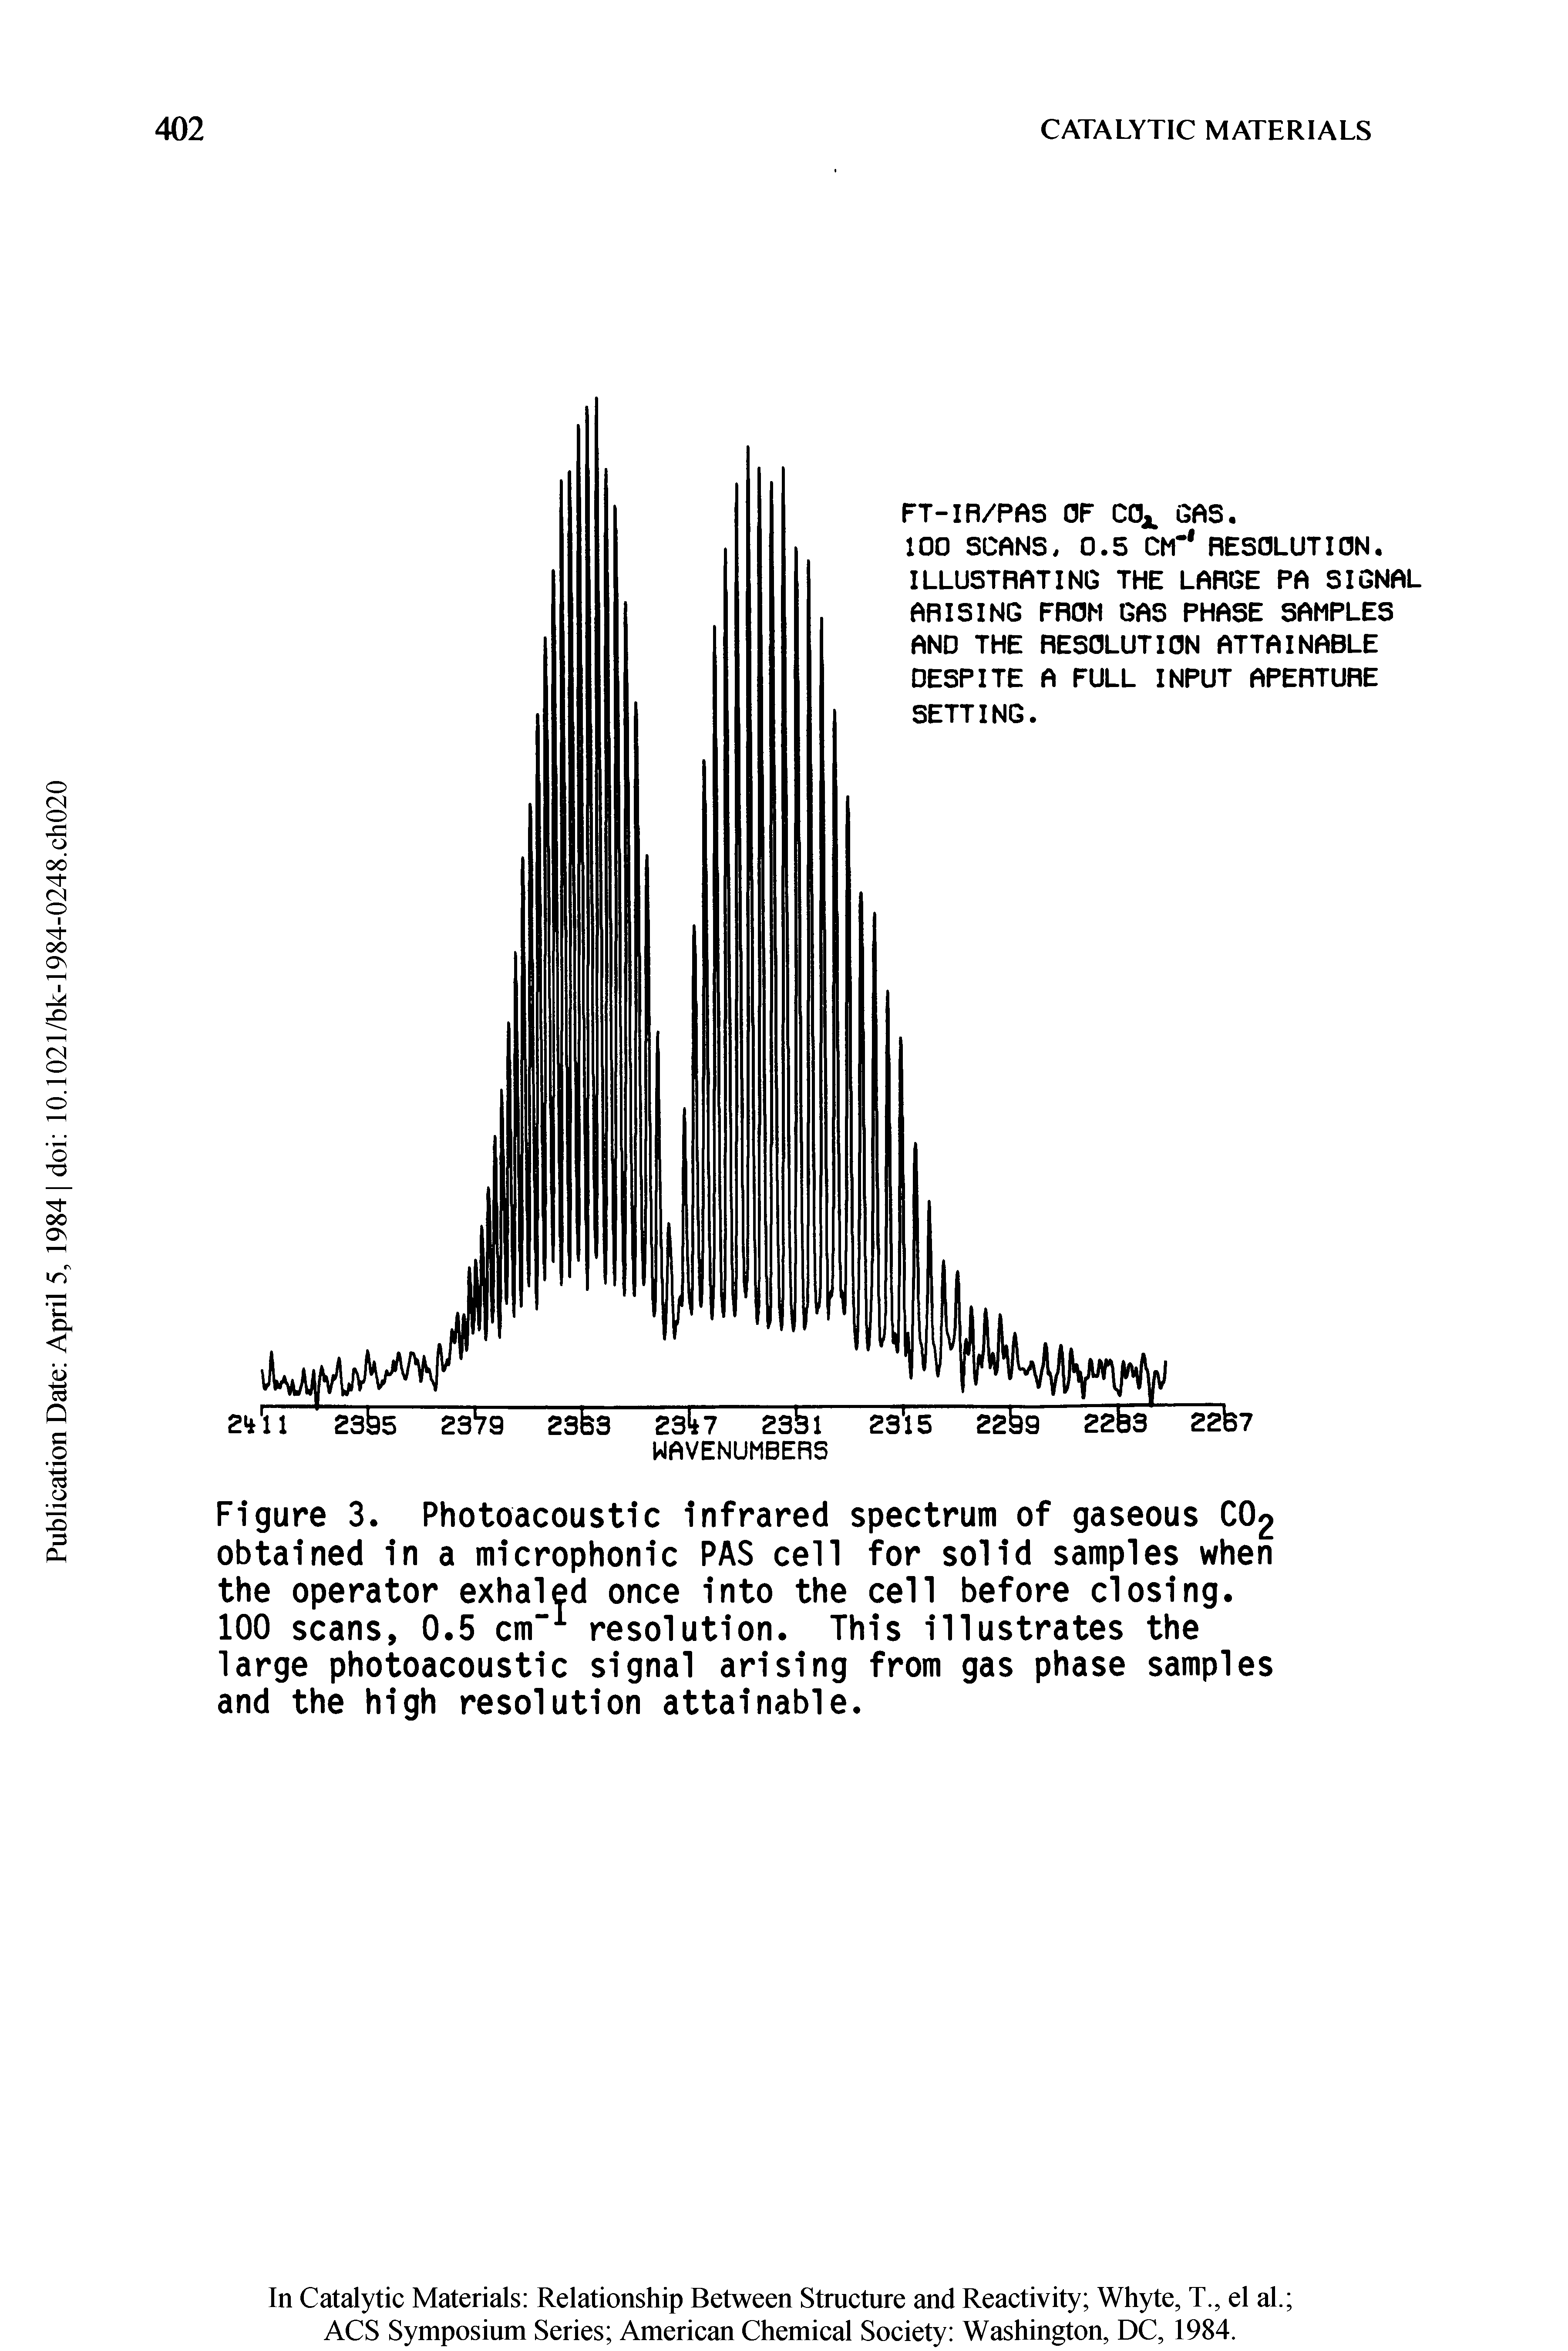 Figure 3. Photoacoustic infrared spectrum of gaseous CO2 obtained in a microphonic PAS cell for solid samples when the operator exhaled once into the cell before closing. 100 scans, 0.5 cm-1 resolution. This illustrates the large photoacoustic signal arising from gas phase samples and the high resolution attainable.